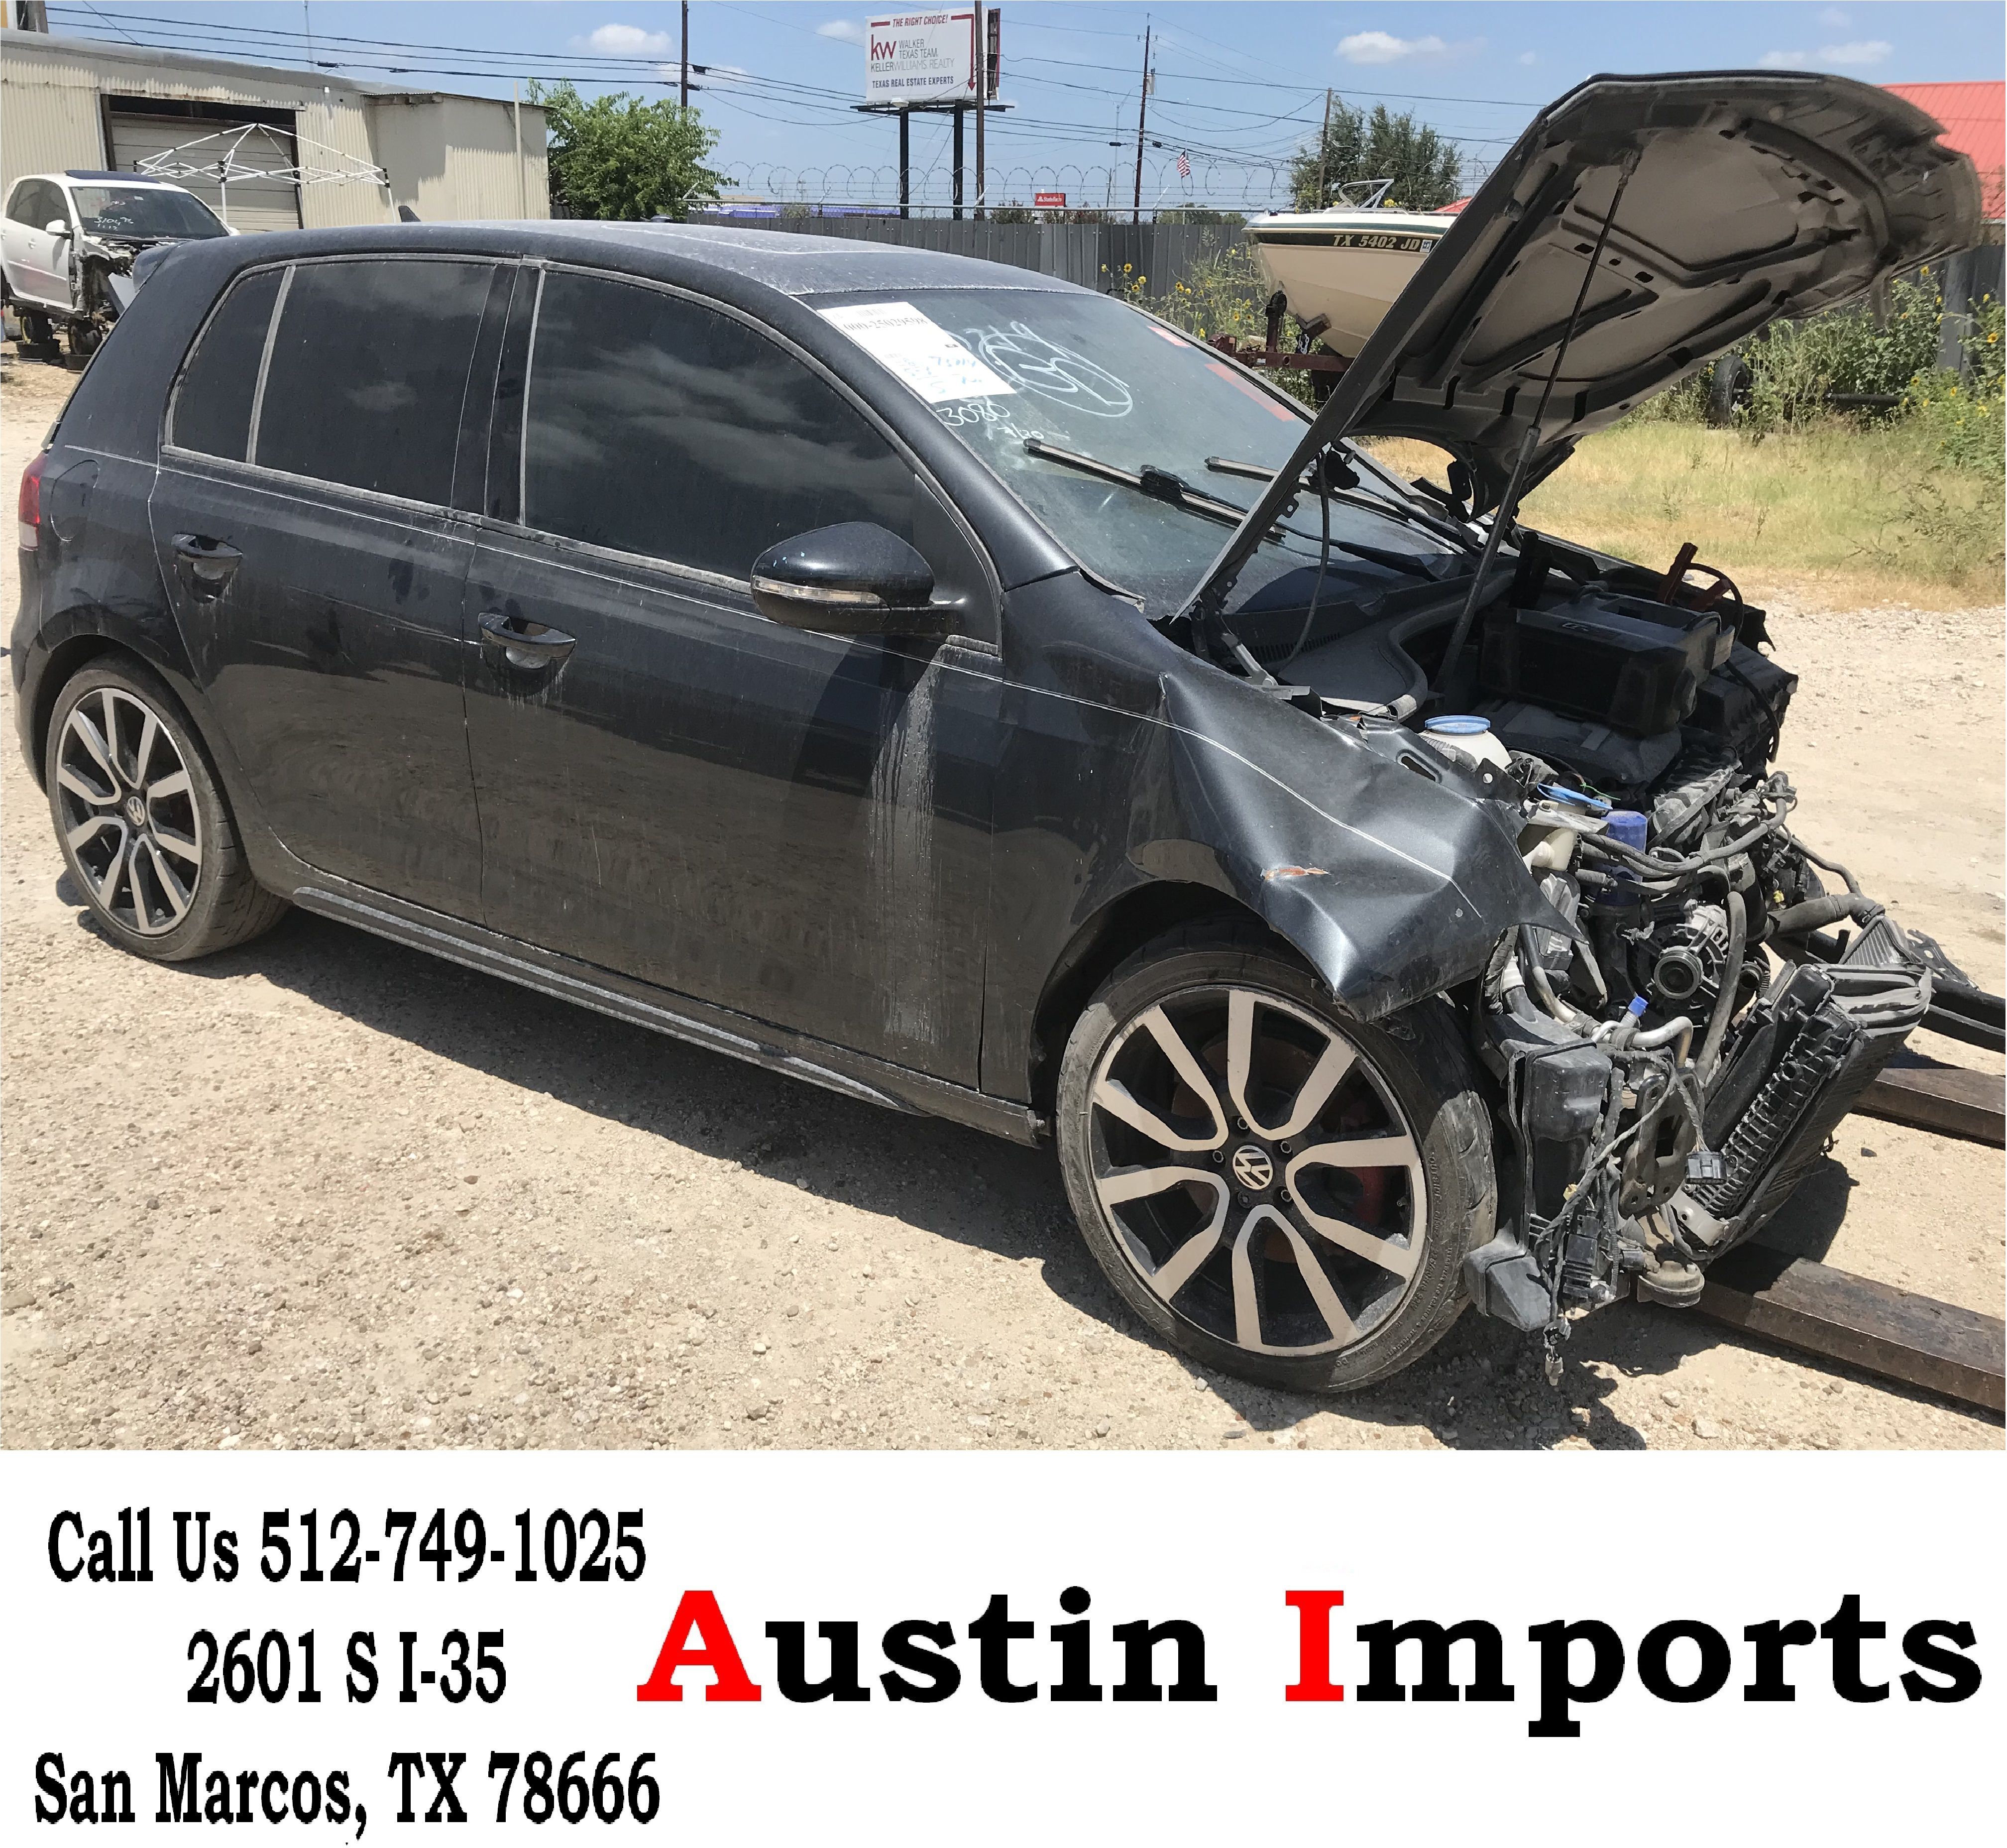 2013 MK6 VW Volkswagen Gti Golf 2.0 Turbo engine Leather Seats 18 Rims 4 Doors left right front rear bumper panels brakes hatch automatic transmission